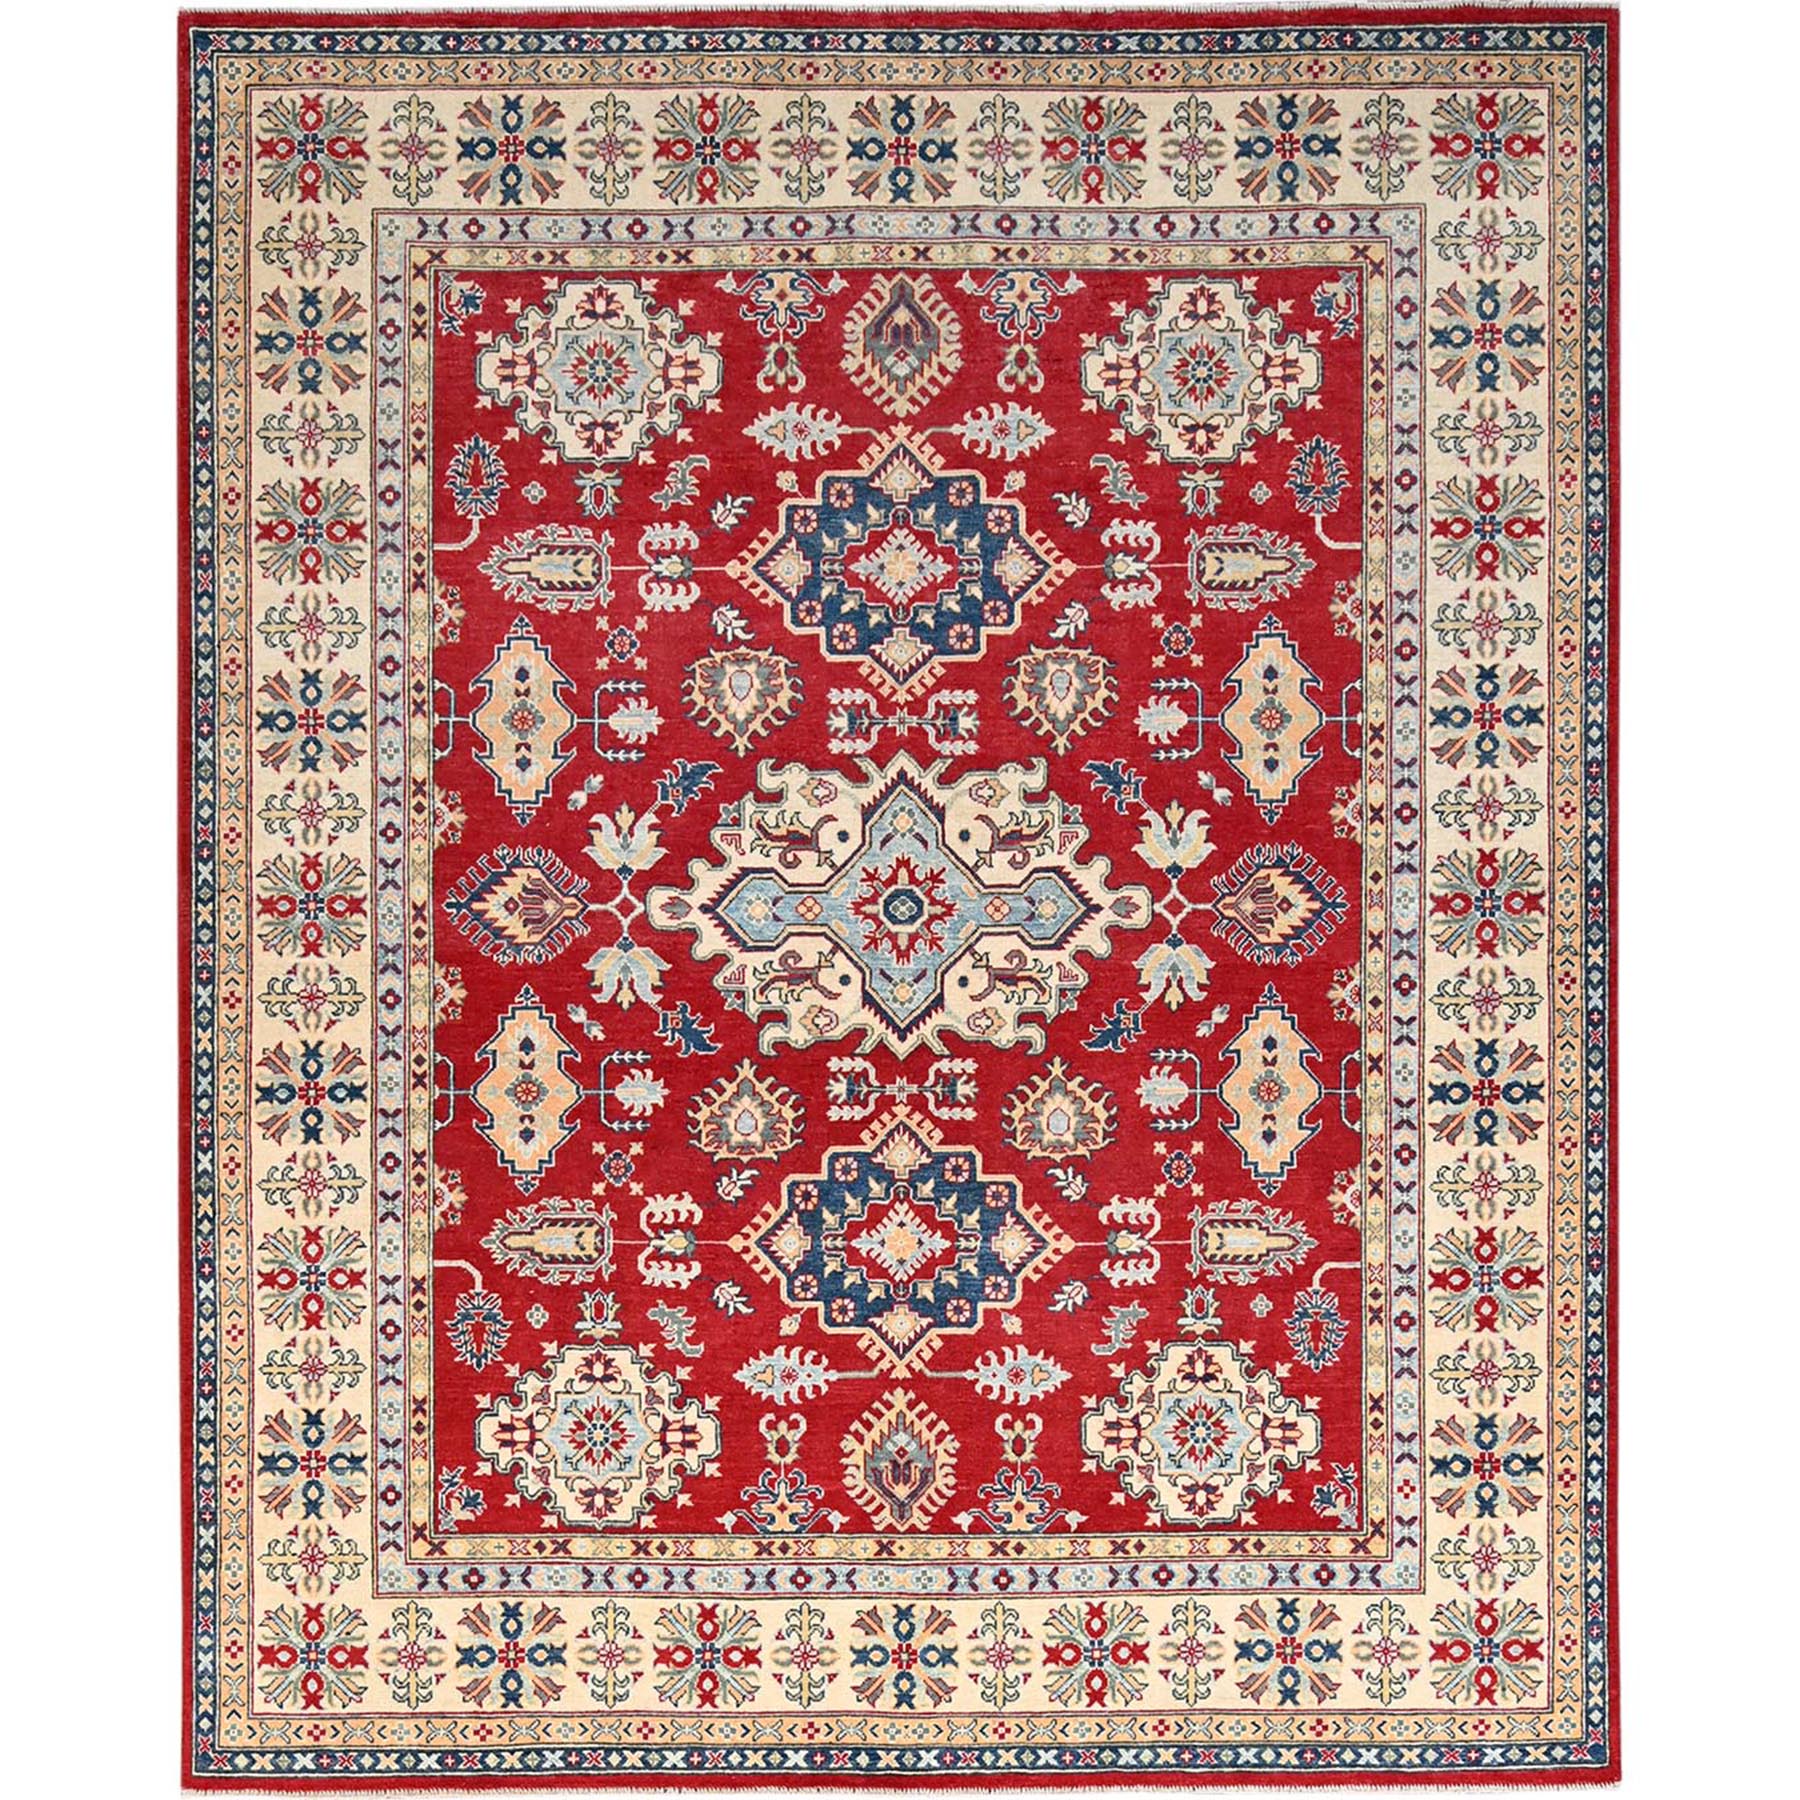 Goji Berry Red, Velvety and Soft Wool, Hand Knotted, Kazak Geometric Motifs Natural Dyes, Densely Woven, Oriental Rug